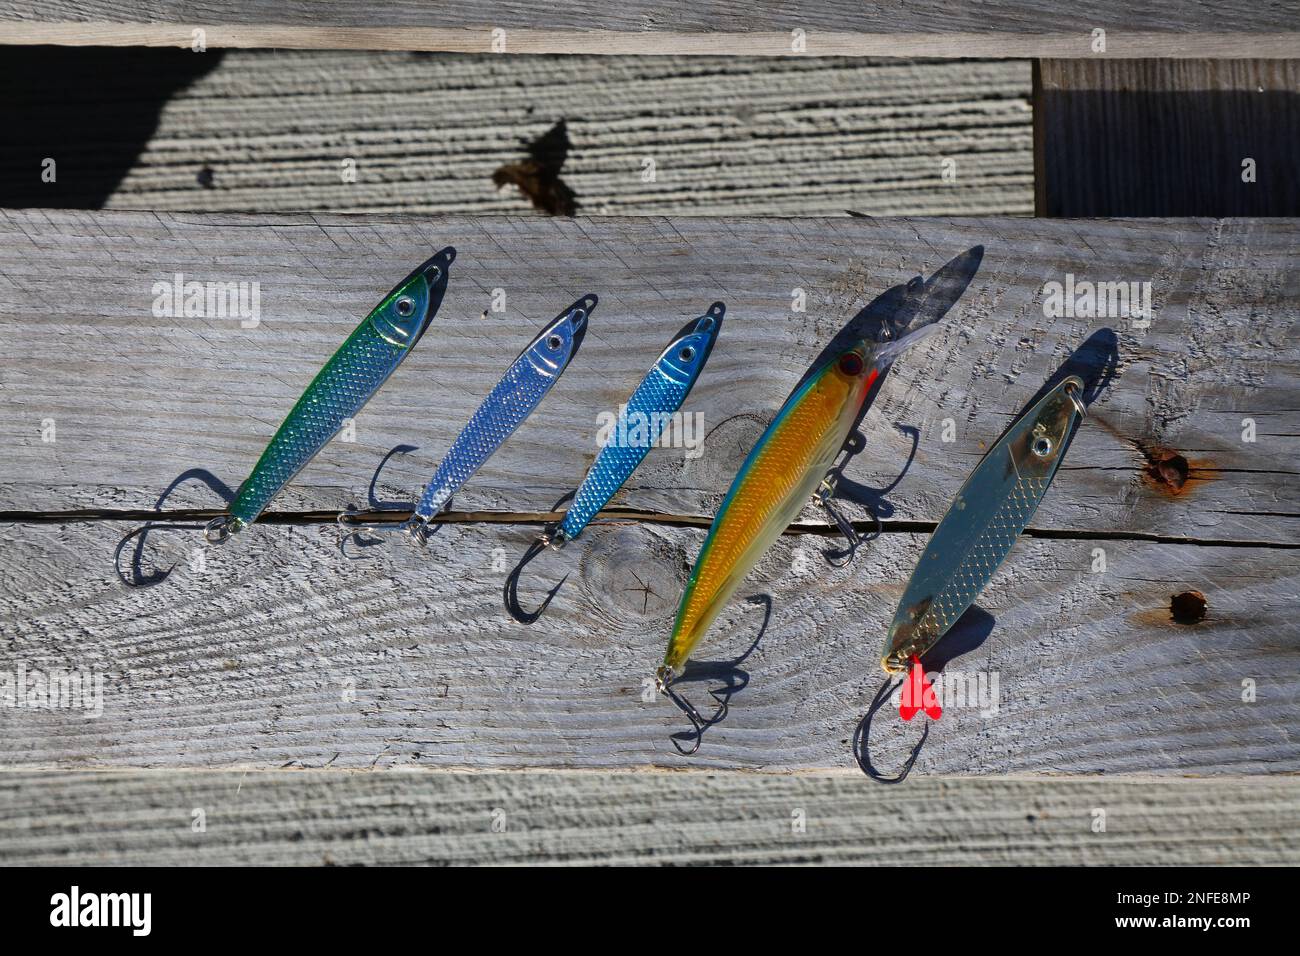 Fishing lures for fishing in Norway. Metal slug type lures for spin fishing  method of angling Stock Photo - Alamy